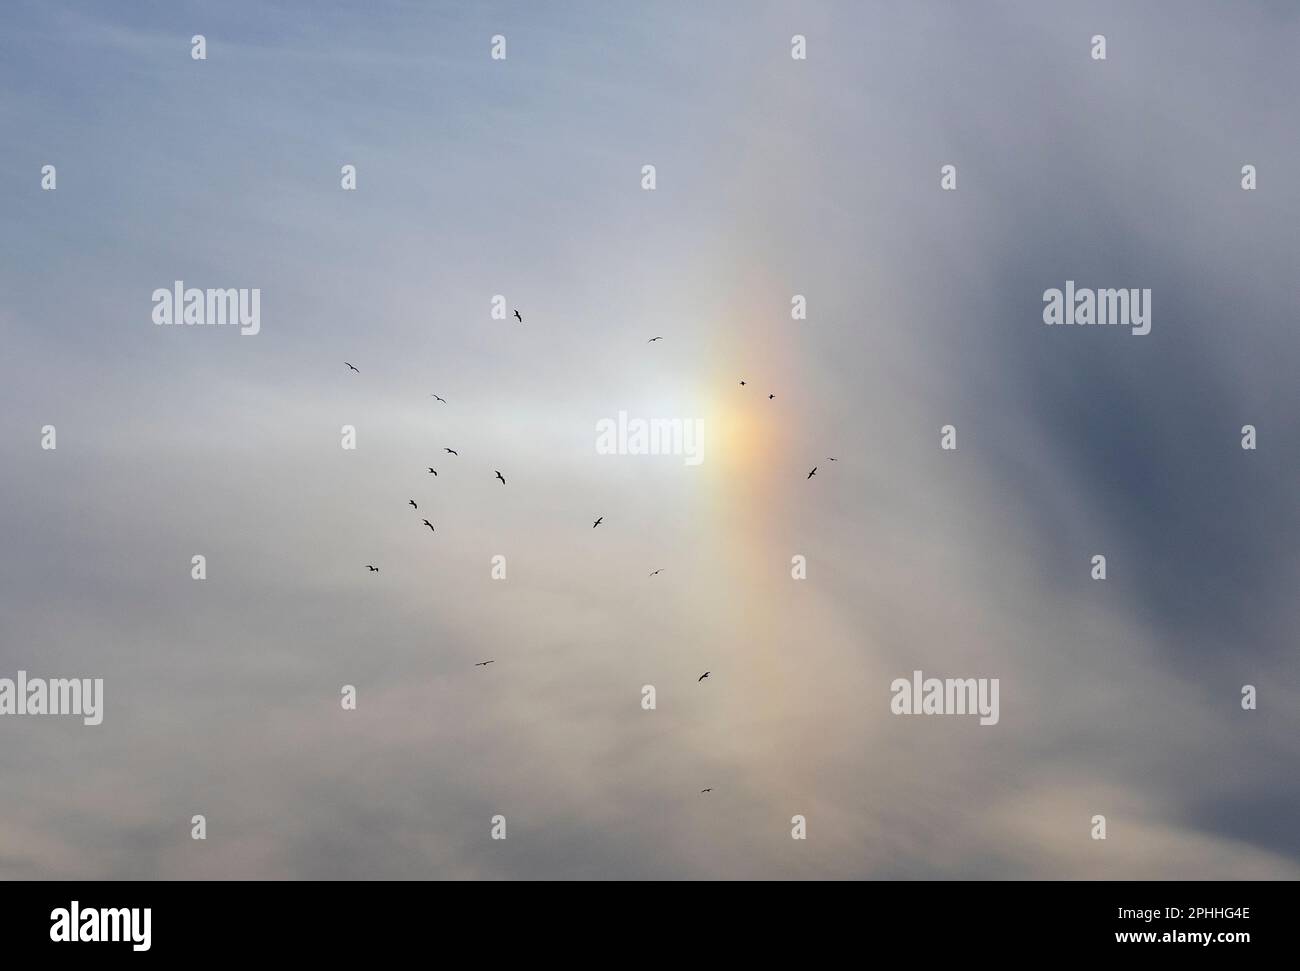 Birds in the sky set against the spectum of colours of a sundog, part of a halo around the sun, at 22 degrees to the left. Caused by light refraction Stock Photo